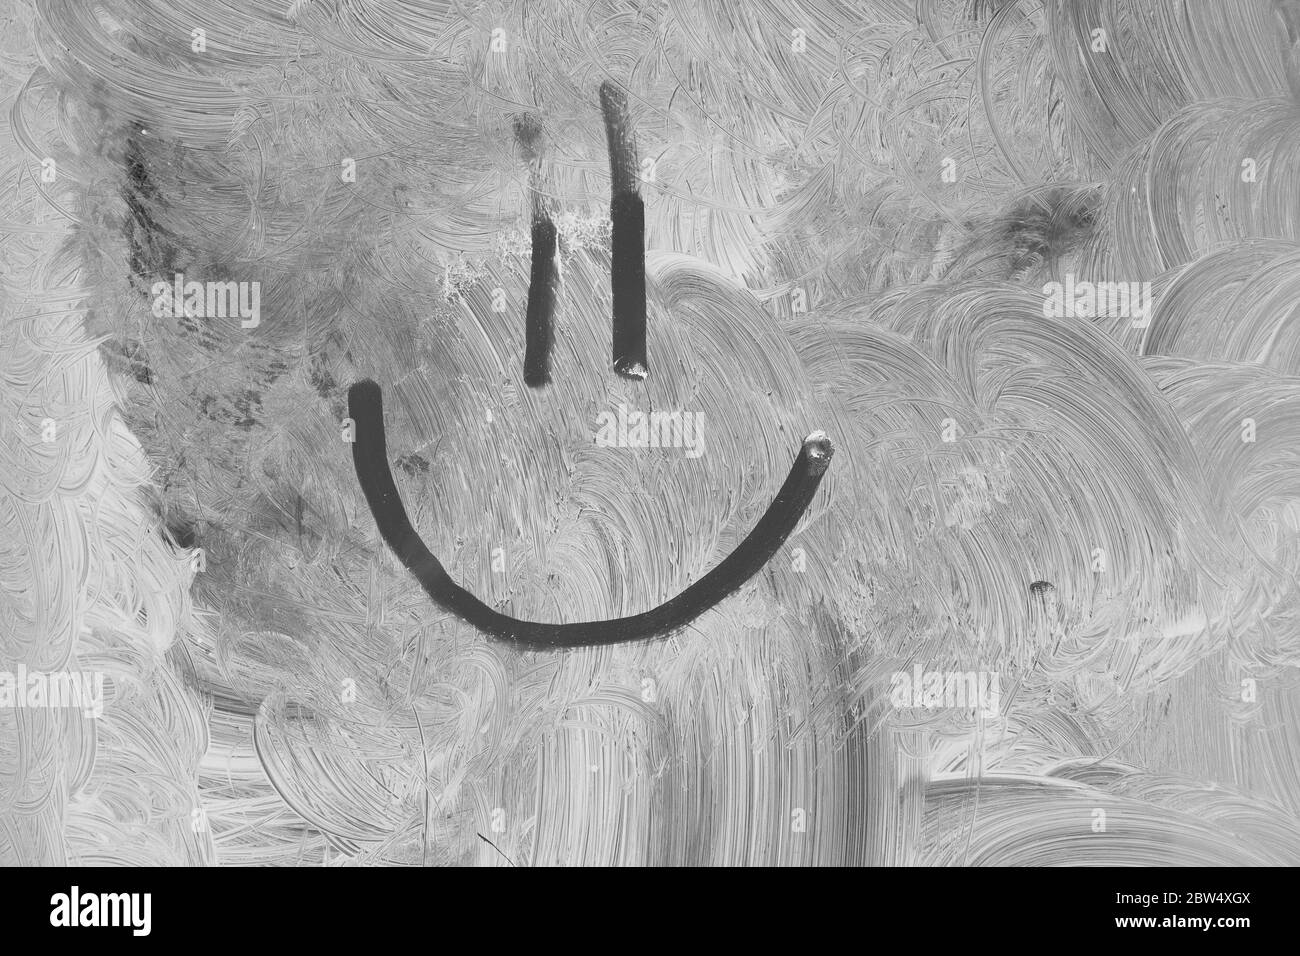 Closeup of a smiley face drawn on a whitewashed window. Stock Photo